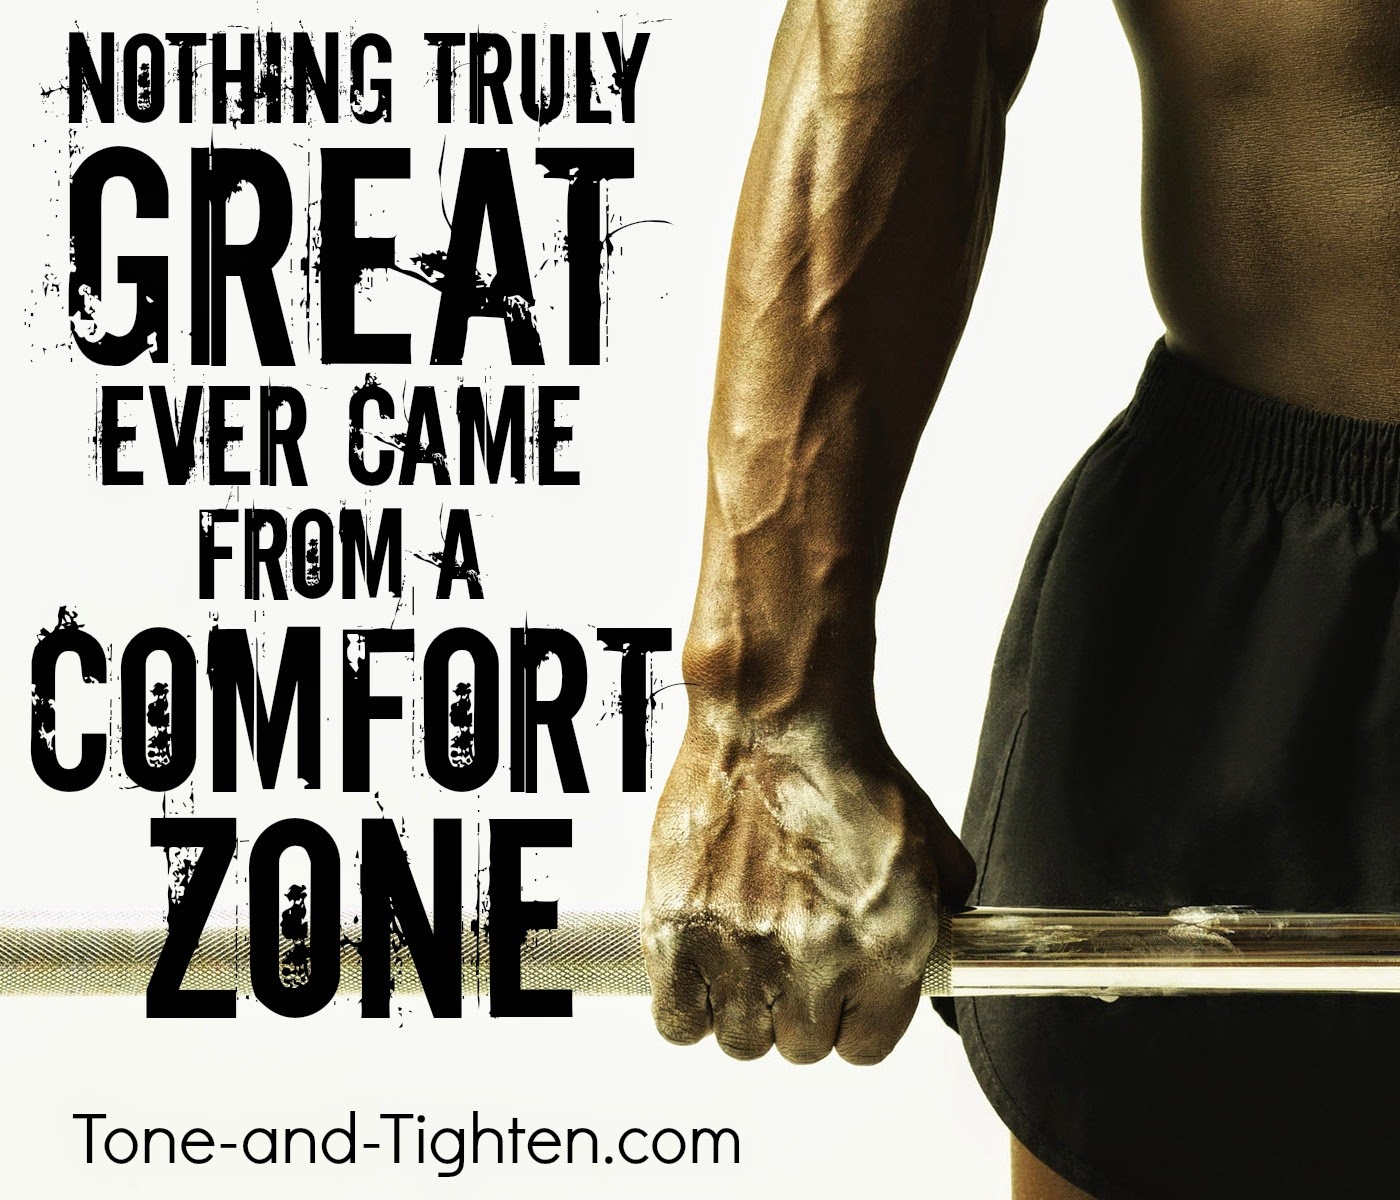 Fitness Motivational Quotes For Training. QuotesGram